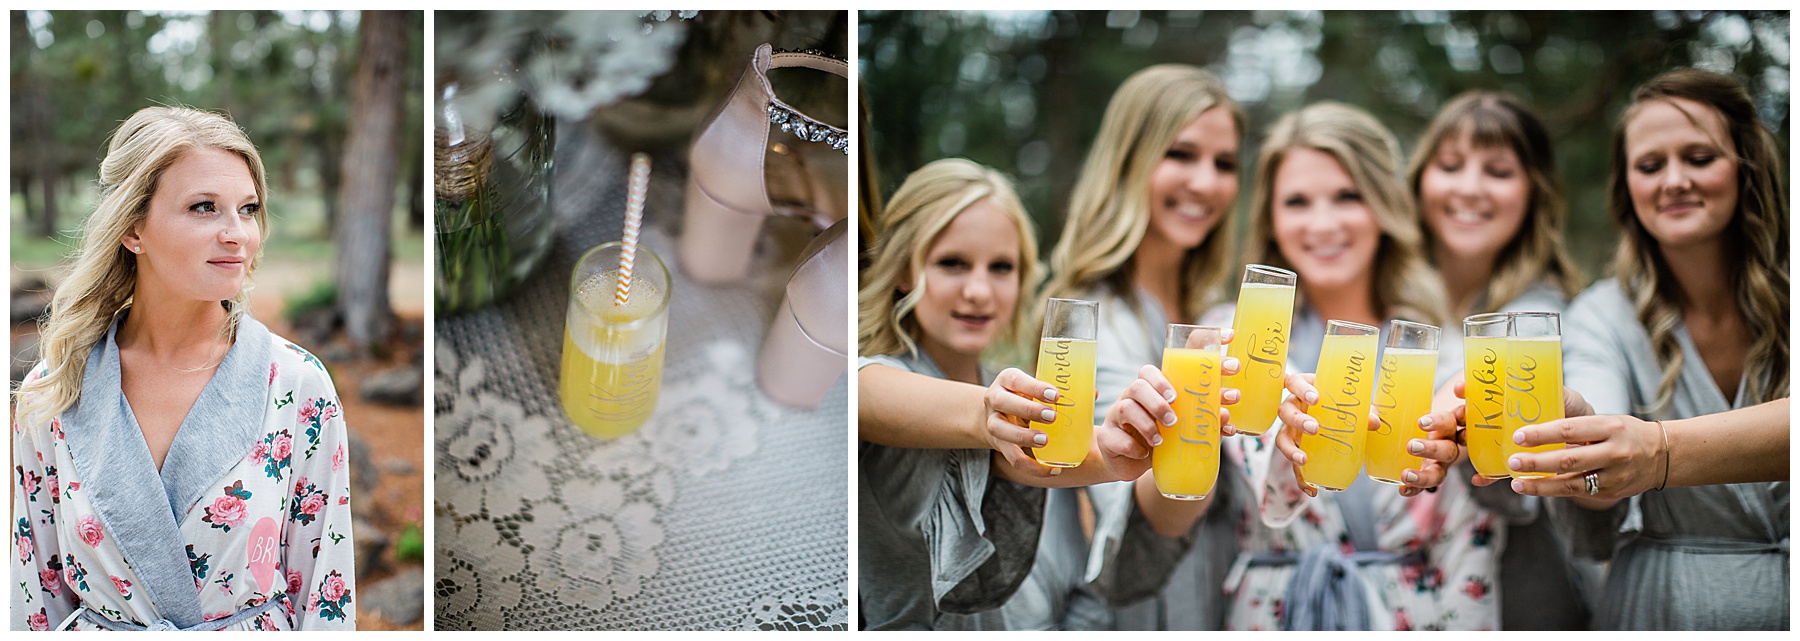 The bride gazing to her right. The morning cocktail placed on a lace table cloth next to her bouquet and shoes. The bride and her bridesmaids smiling while holding their mimosas in customized glasses.